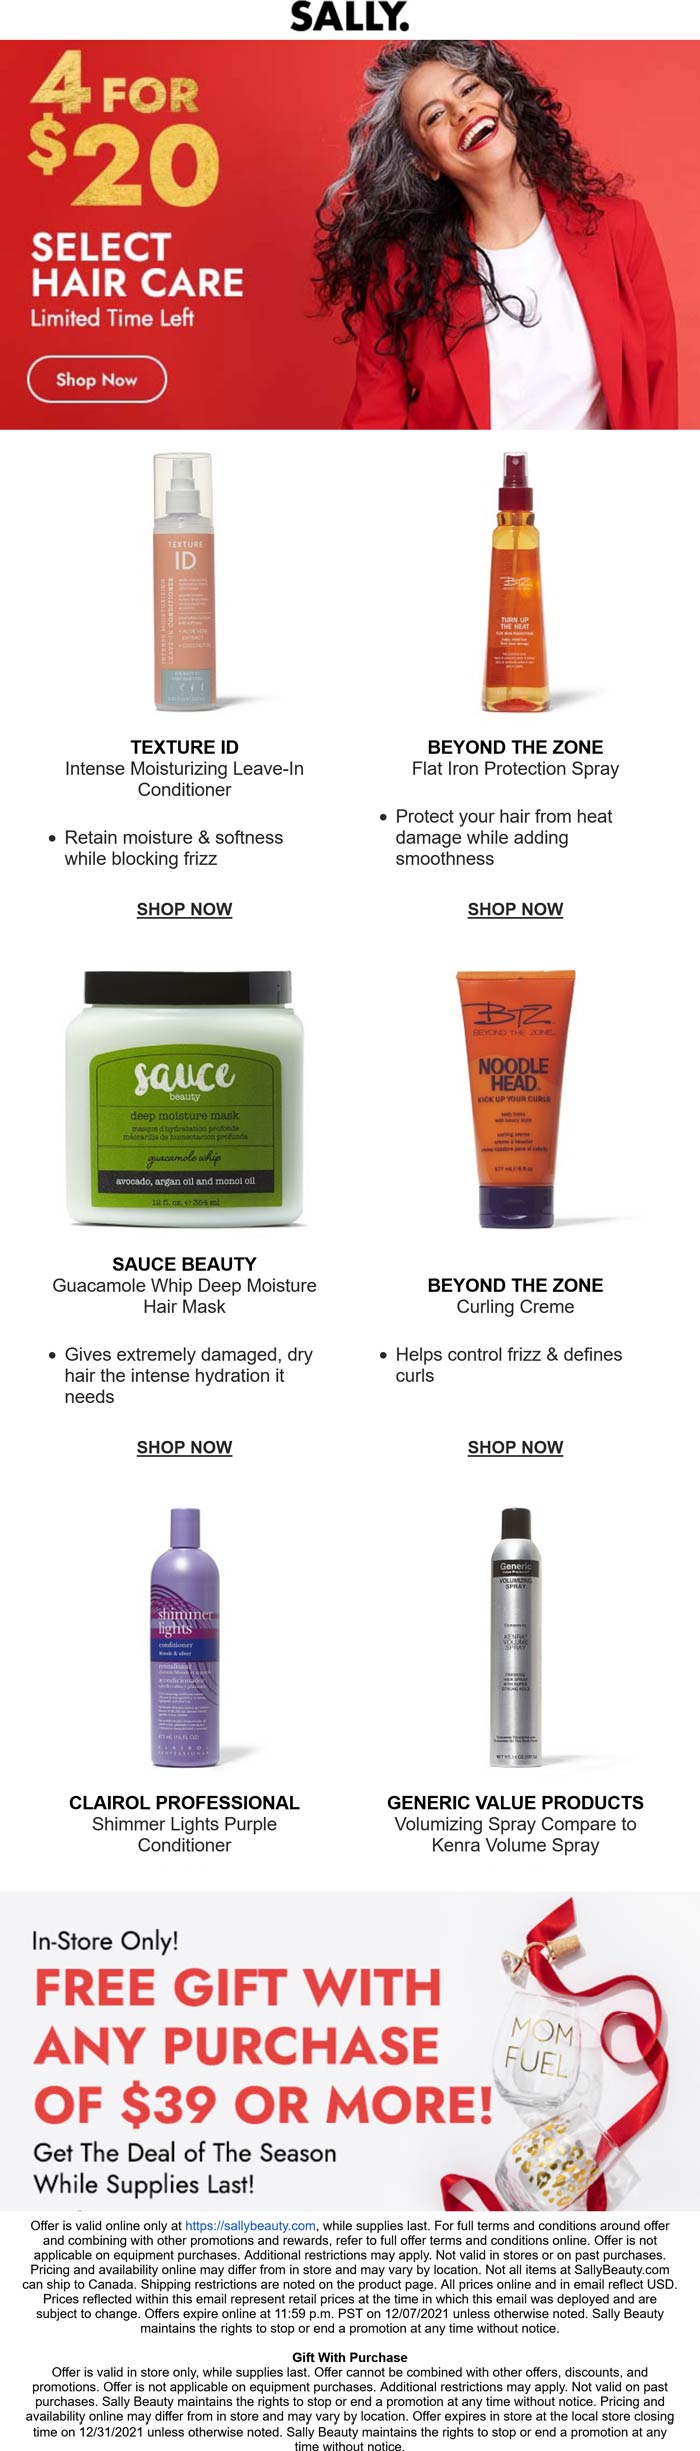 Sally stores Coupon  4 for $20 on various haircare online at Sally Beauty #sally 